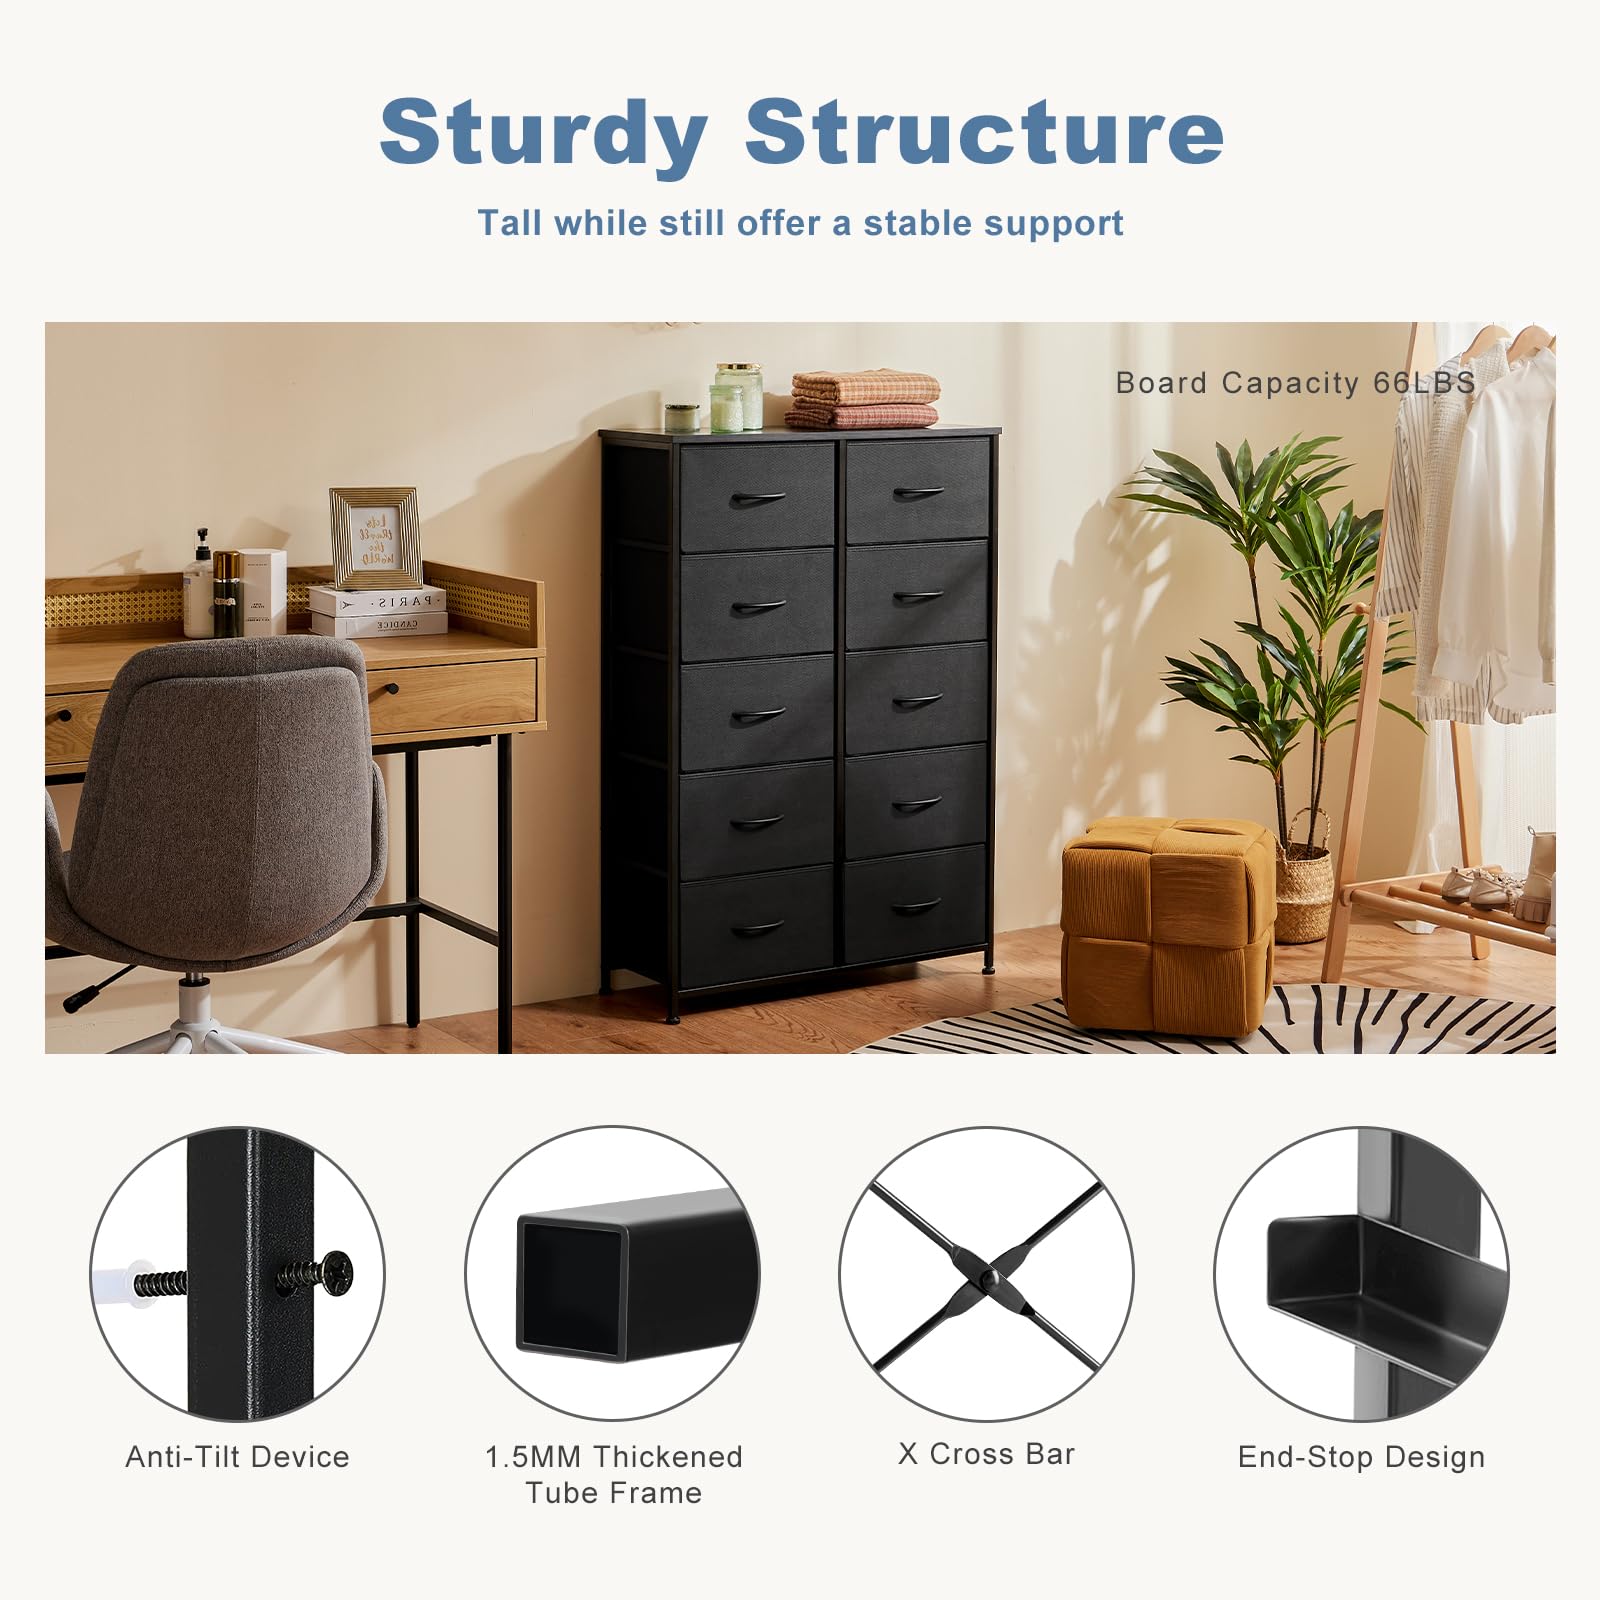 Dresser for Bedroom, Tall Storage Drawers, Fabric Storage Tower with 10 Drawers, Chest of Drawers with Fabric Bins, Sturdy Metal Frame, Wood Tabletop for Kids room, Closet, Entryway, Nursery, Black